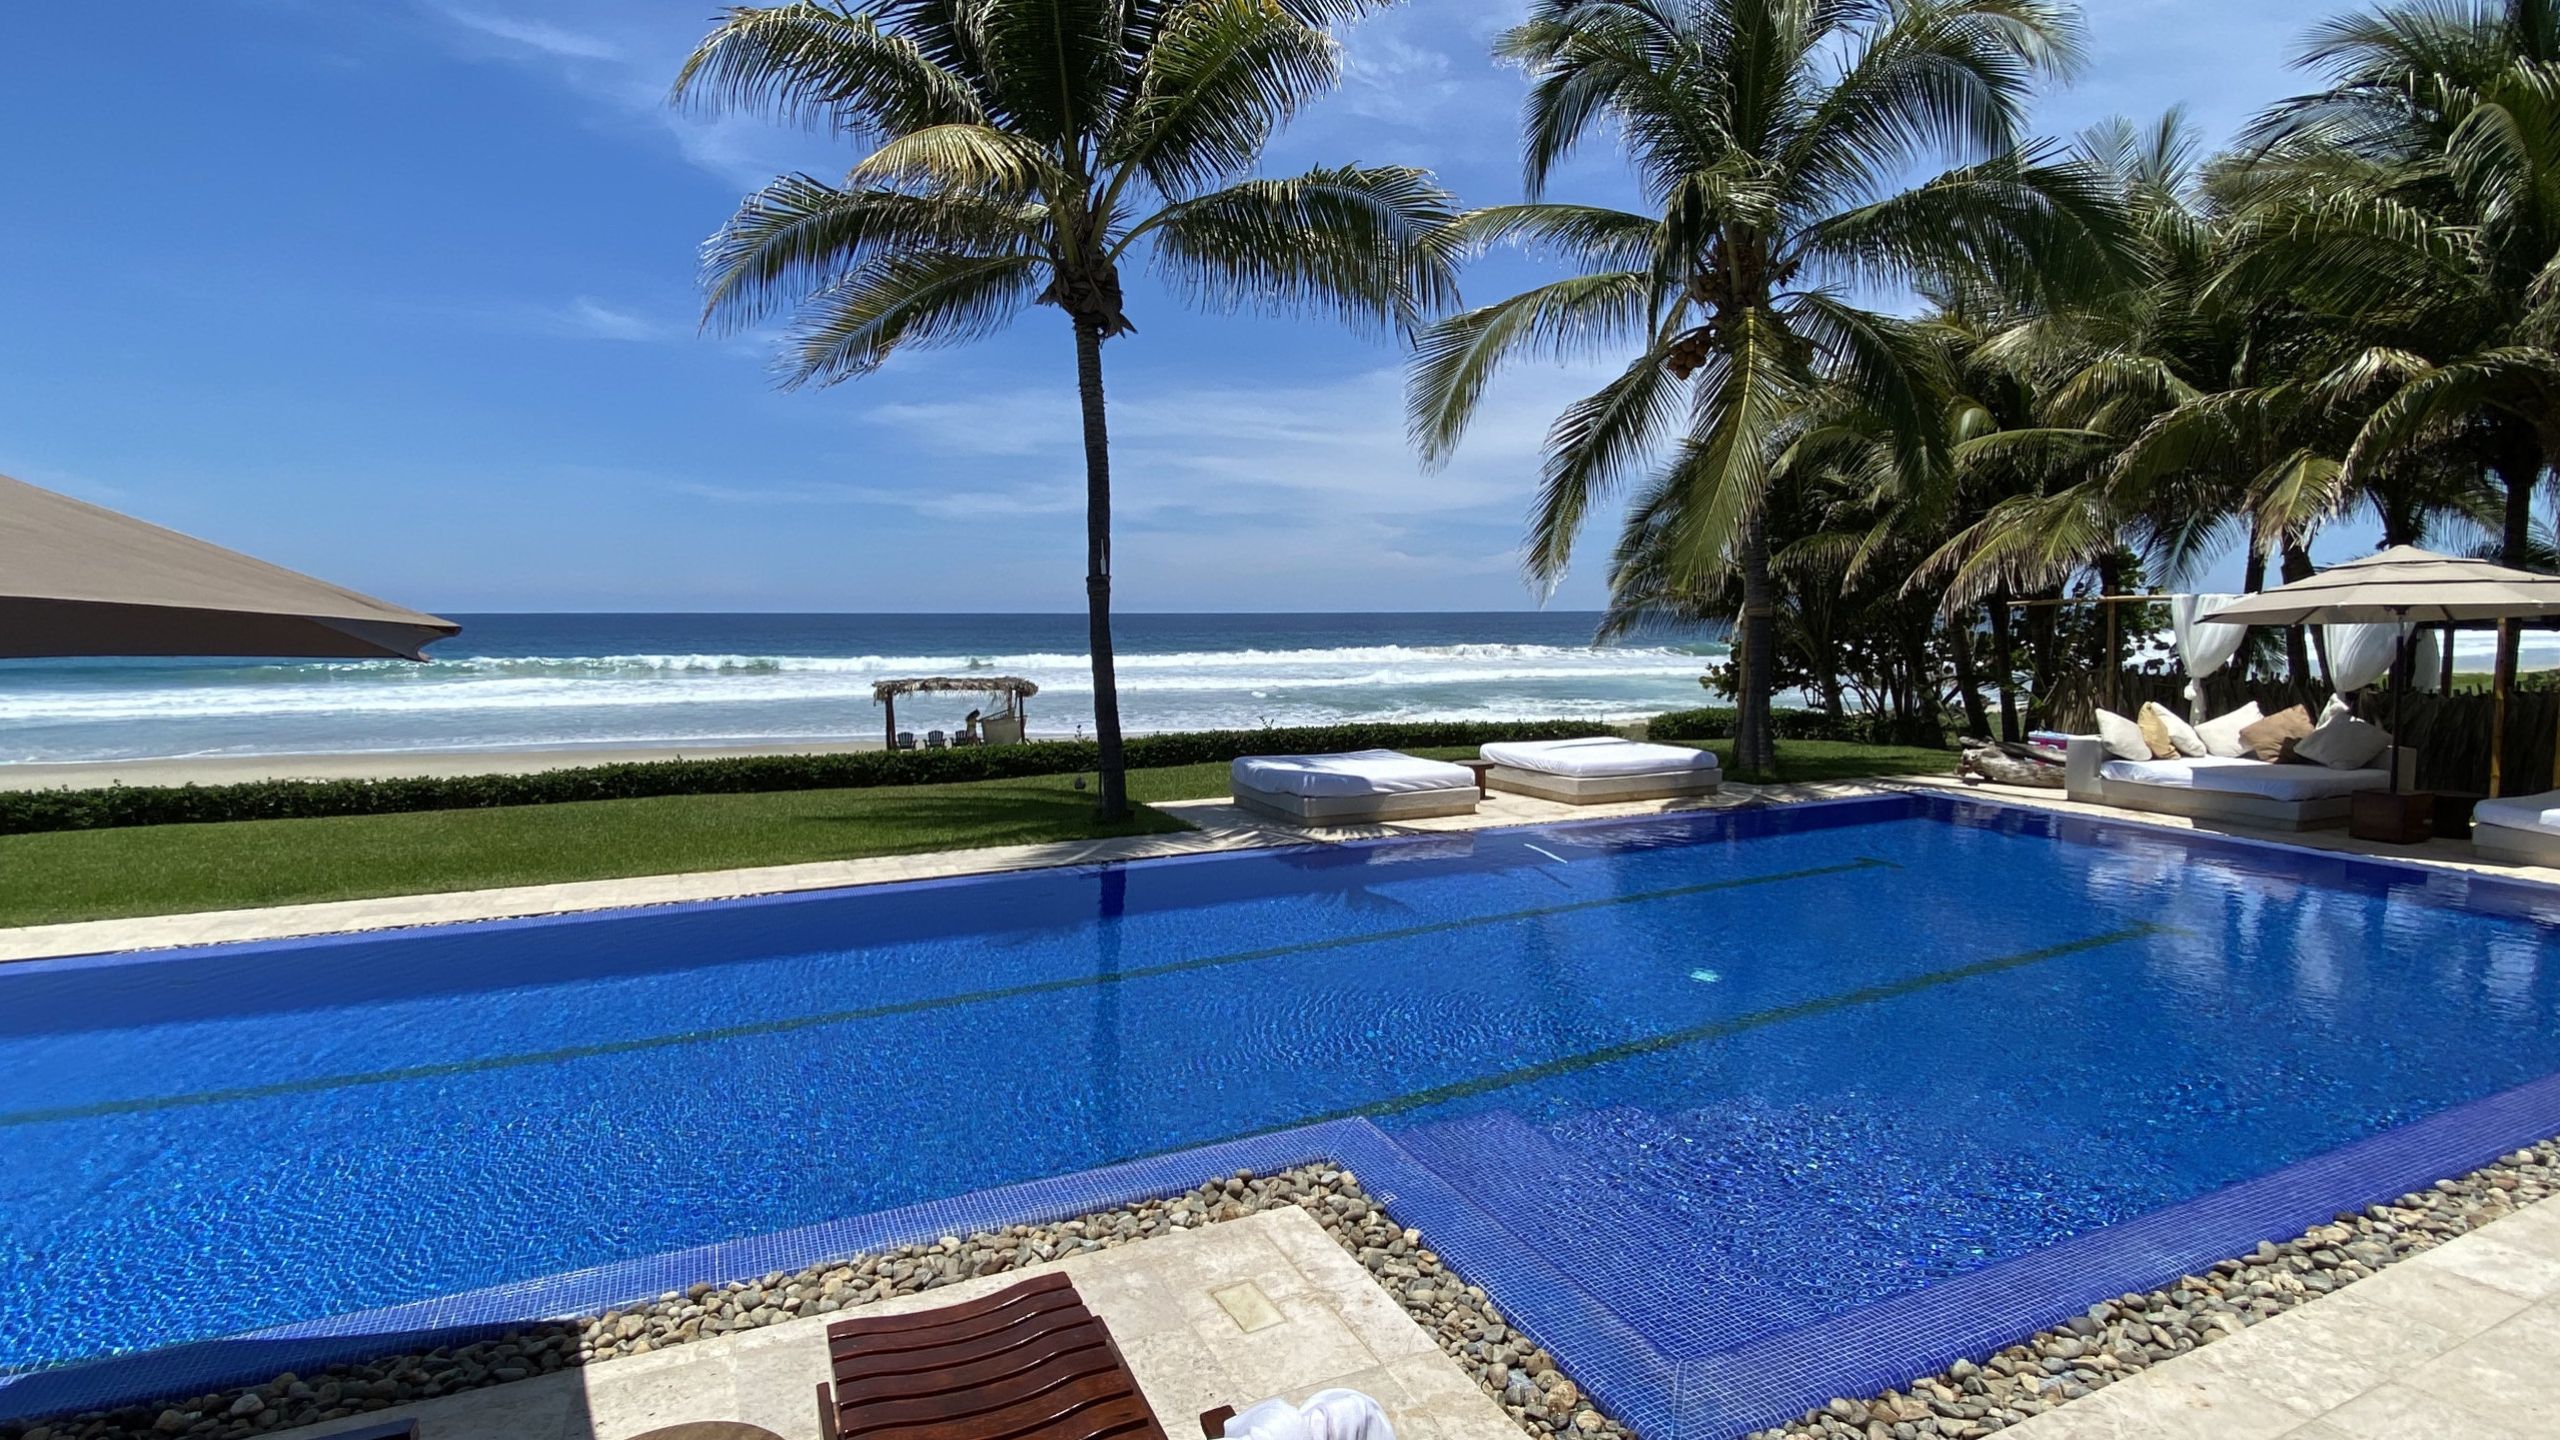 Casa Emelina oceanfront with big private pool, palm trees and ocean in the background. 